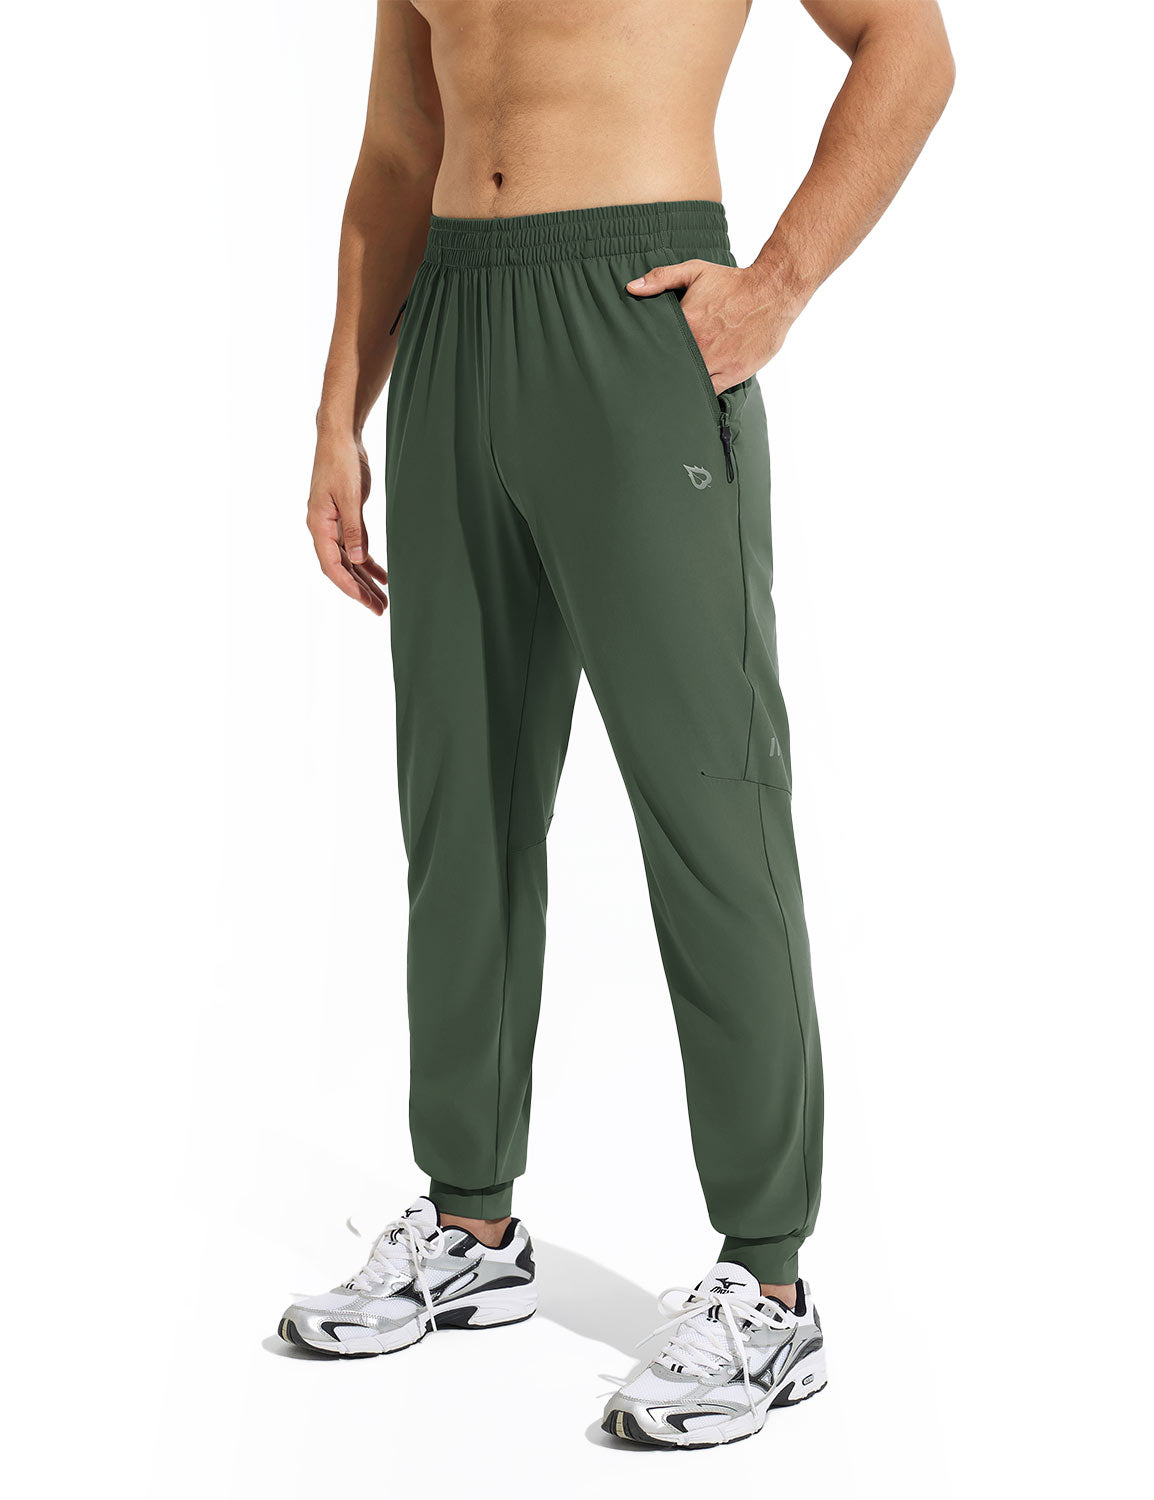 Baleaf Men's High-Stretchy Quick-Dry Joggers Pants Rifle Green Side